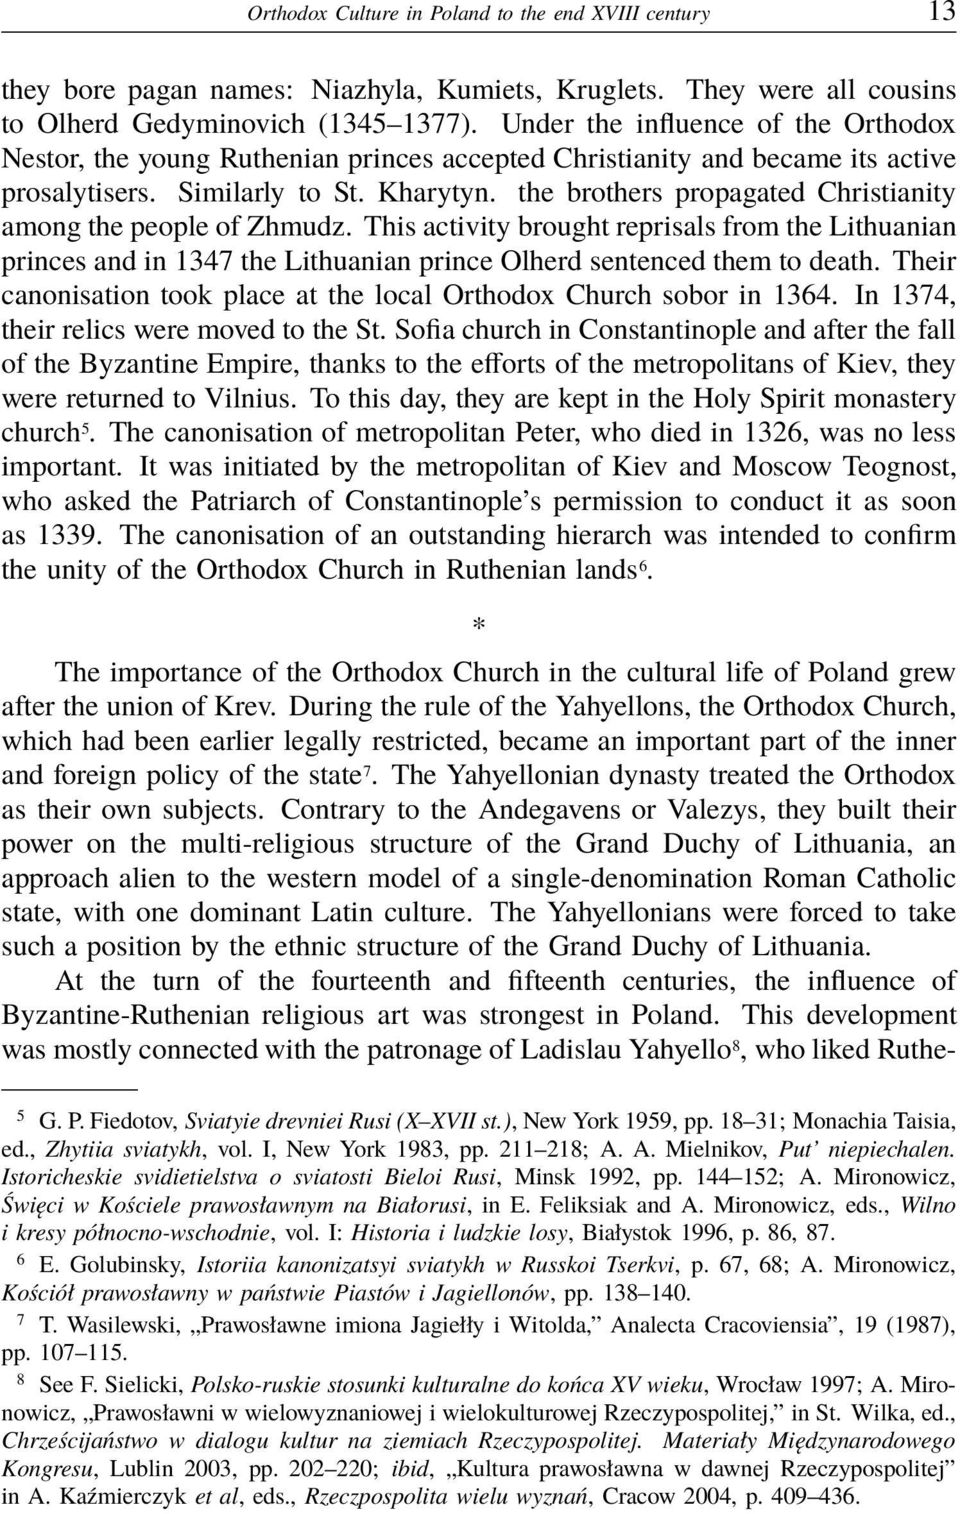 the brothers propagated Christianity among the people of Zhmudz. This activity brought reprisals from the Lithuanian princes and in 1347 the Lithuanian prince Olherd sentenced them to death.